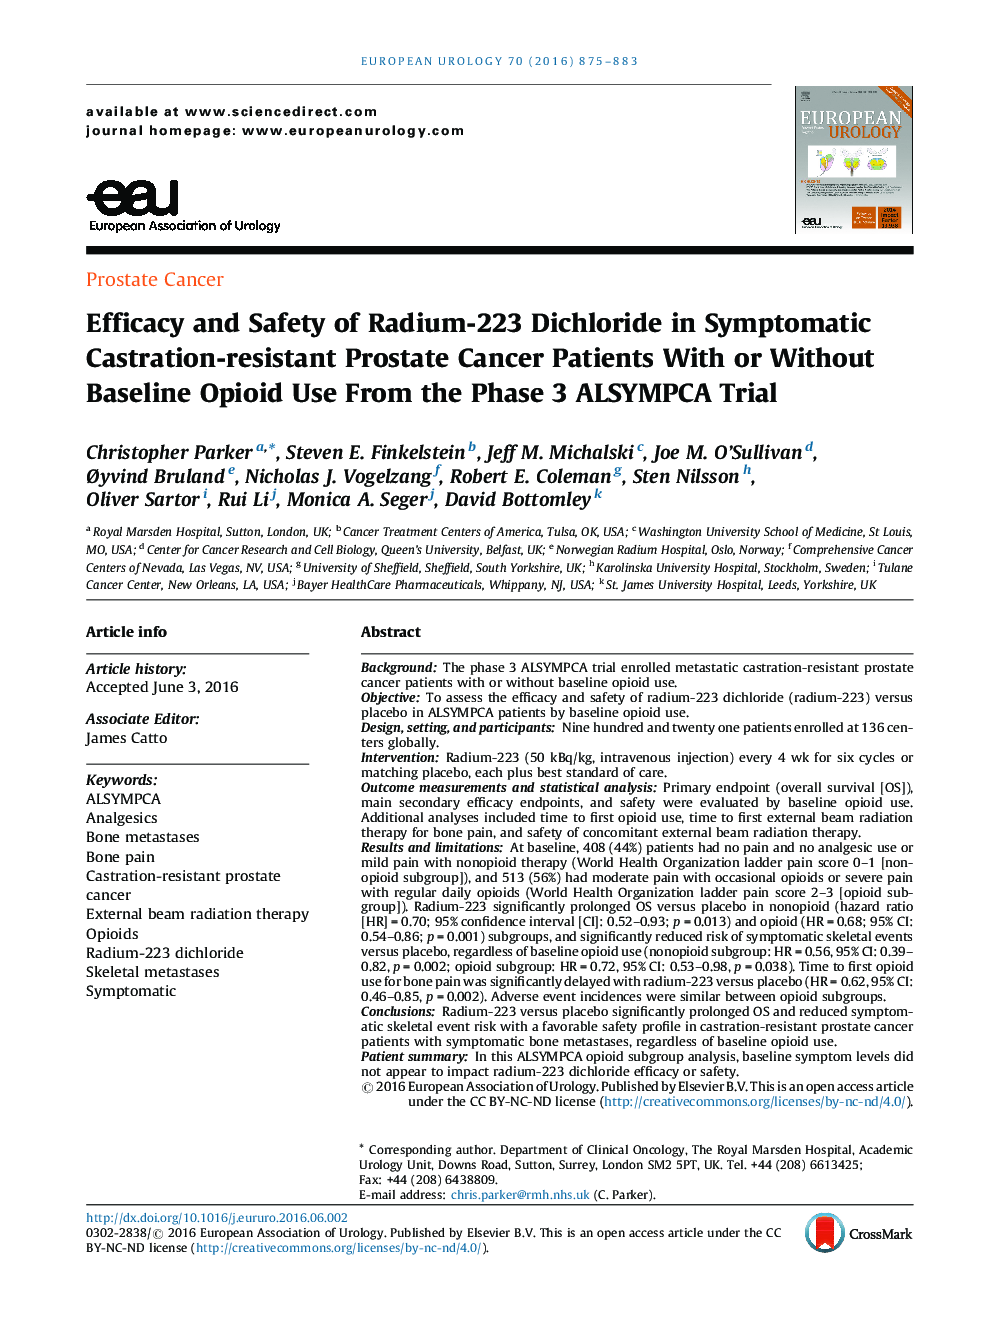 Efficacy and Safety of Radium-223 Dichloride in Symptomatic Castration-resistant Prostate Cancer Patients With or Without Baseline Opioid Use From the Phase 3 ALSYMPCA Trial